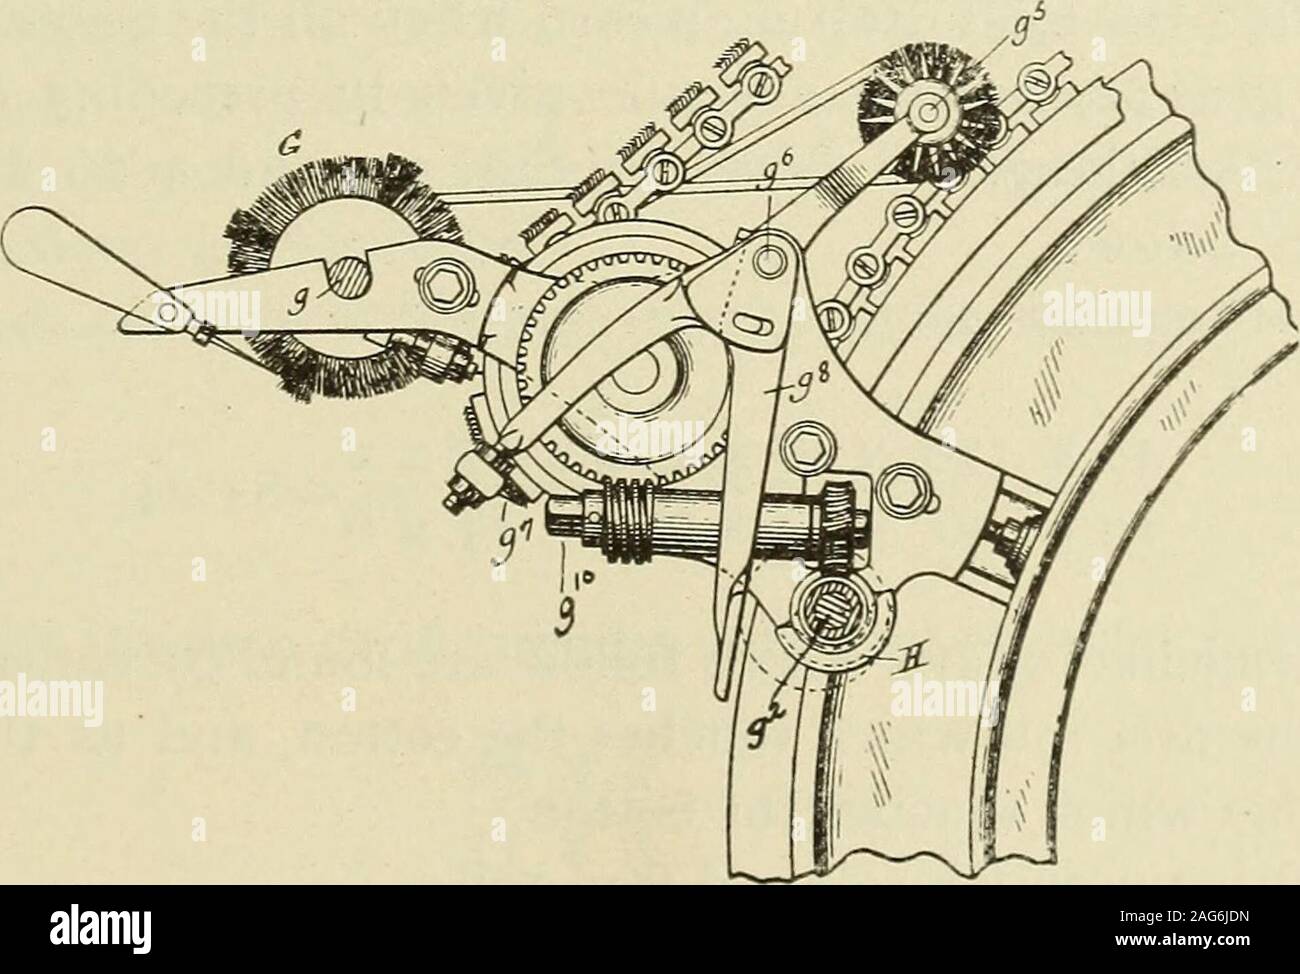 . The principles and processes of cotton yarn manufacture. Fig. 58. gear increases the number of yards produced in a given length of time,without affecting the draft. In Figs. 58 and 59 the driving mechanism for the fiats is shown.. Fig. 59. A pulley shown on the shaft ^- is connected with a small pulley on thecylinder by a belt. Integral with this pulley is a worm which drives theworm wheel shown, on the shaft with which is the worm seen in the 78 COTTON YARN MANUFACTURE drawing. This in turn drives the larger worm wheel ^&lt;^. On the shaftwith this are two sprocket wheels, one on each side Stock Photo